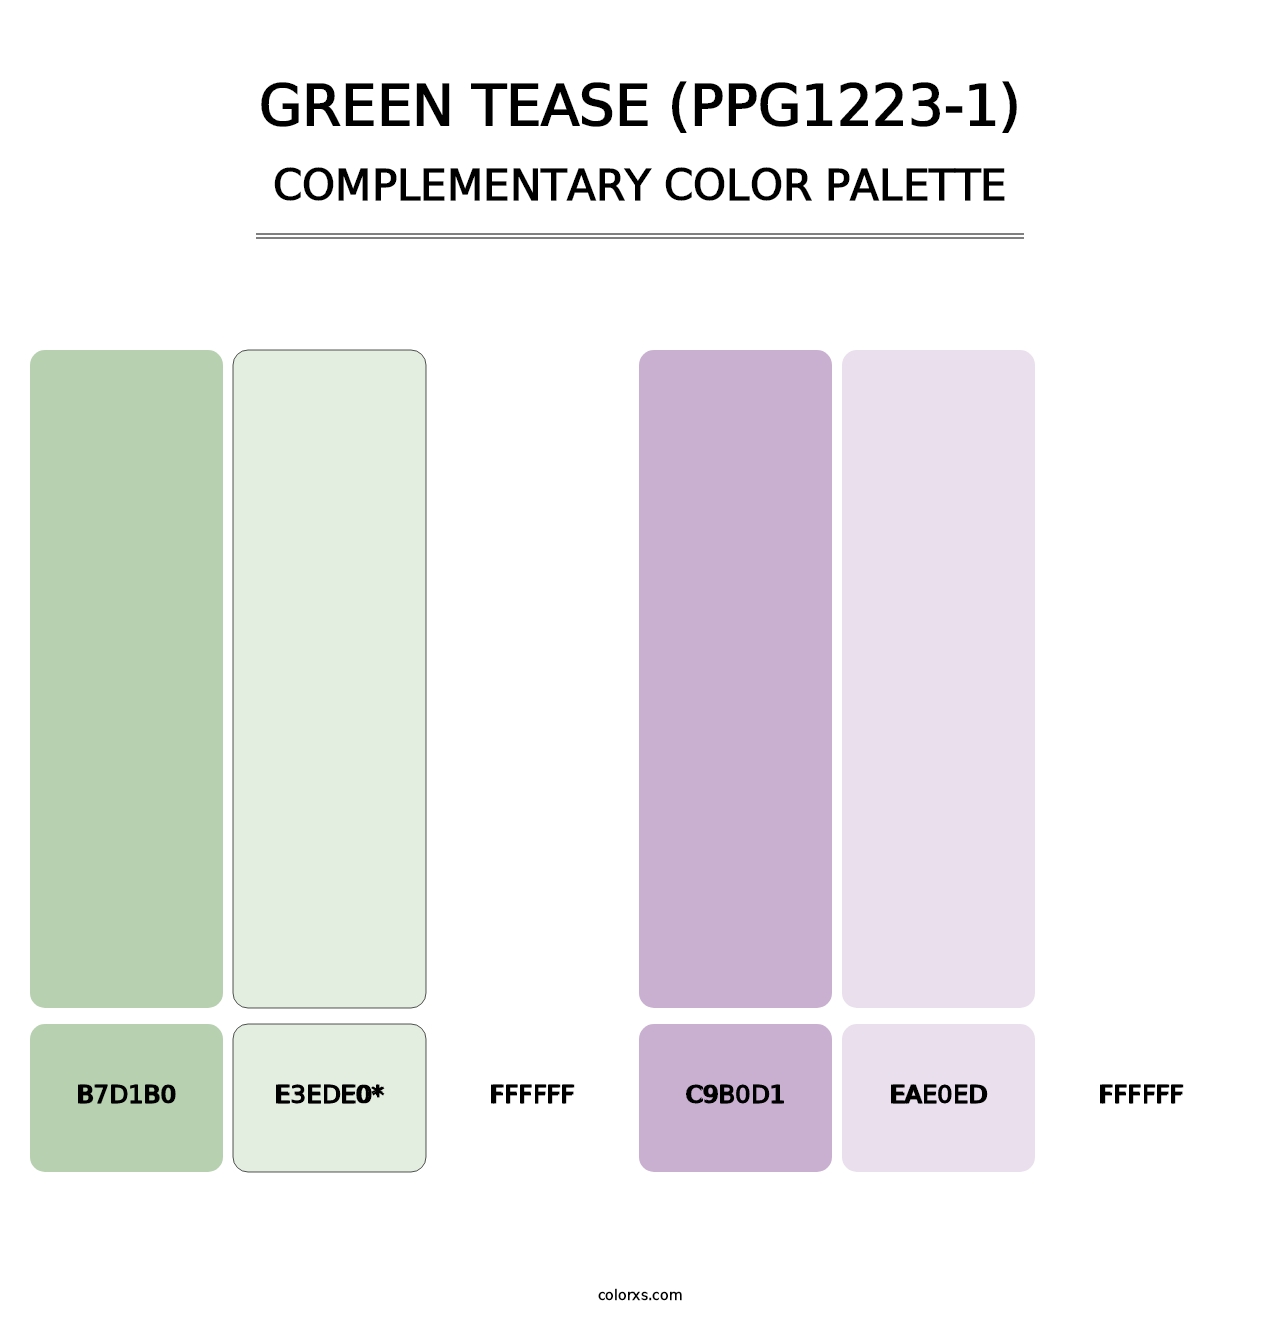 Green Tease (PPG1223-1) - Complementary Color Palette